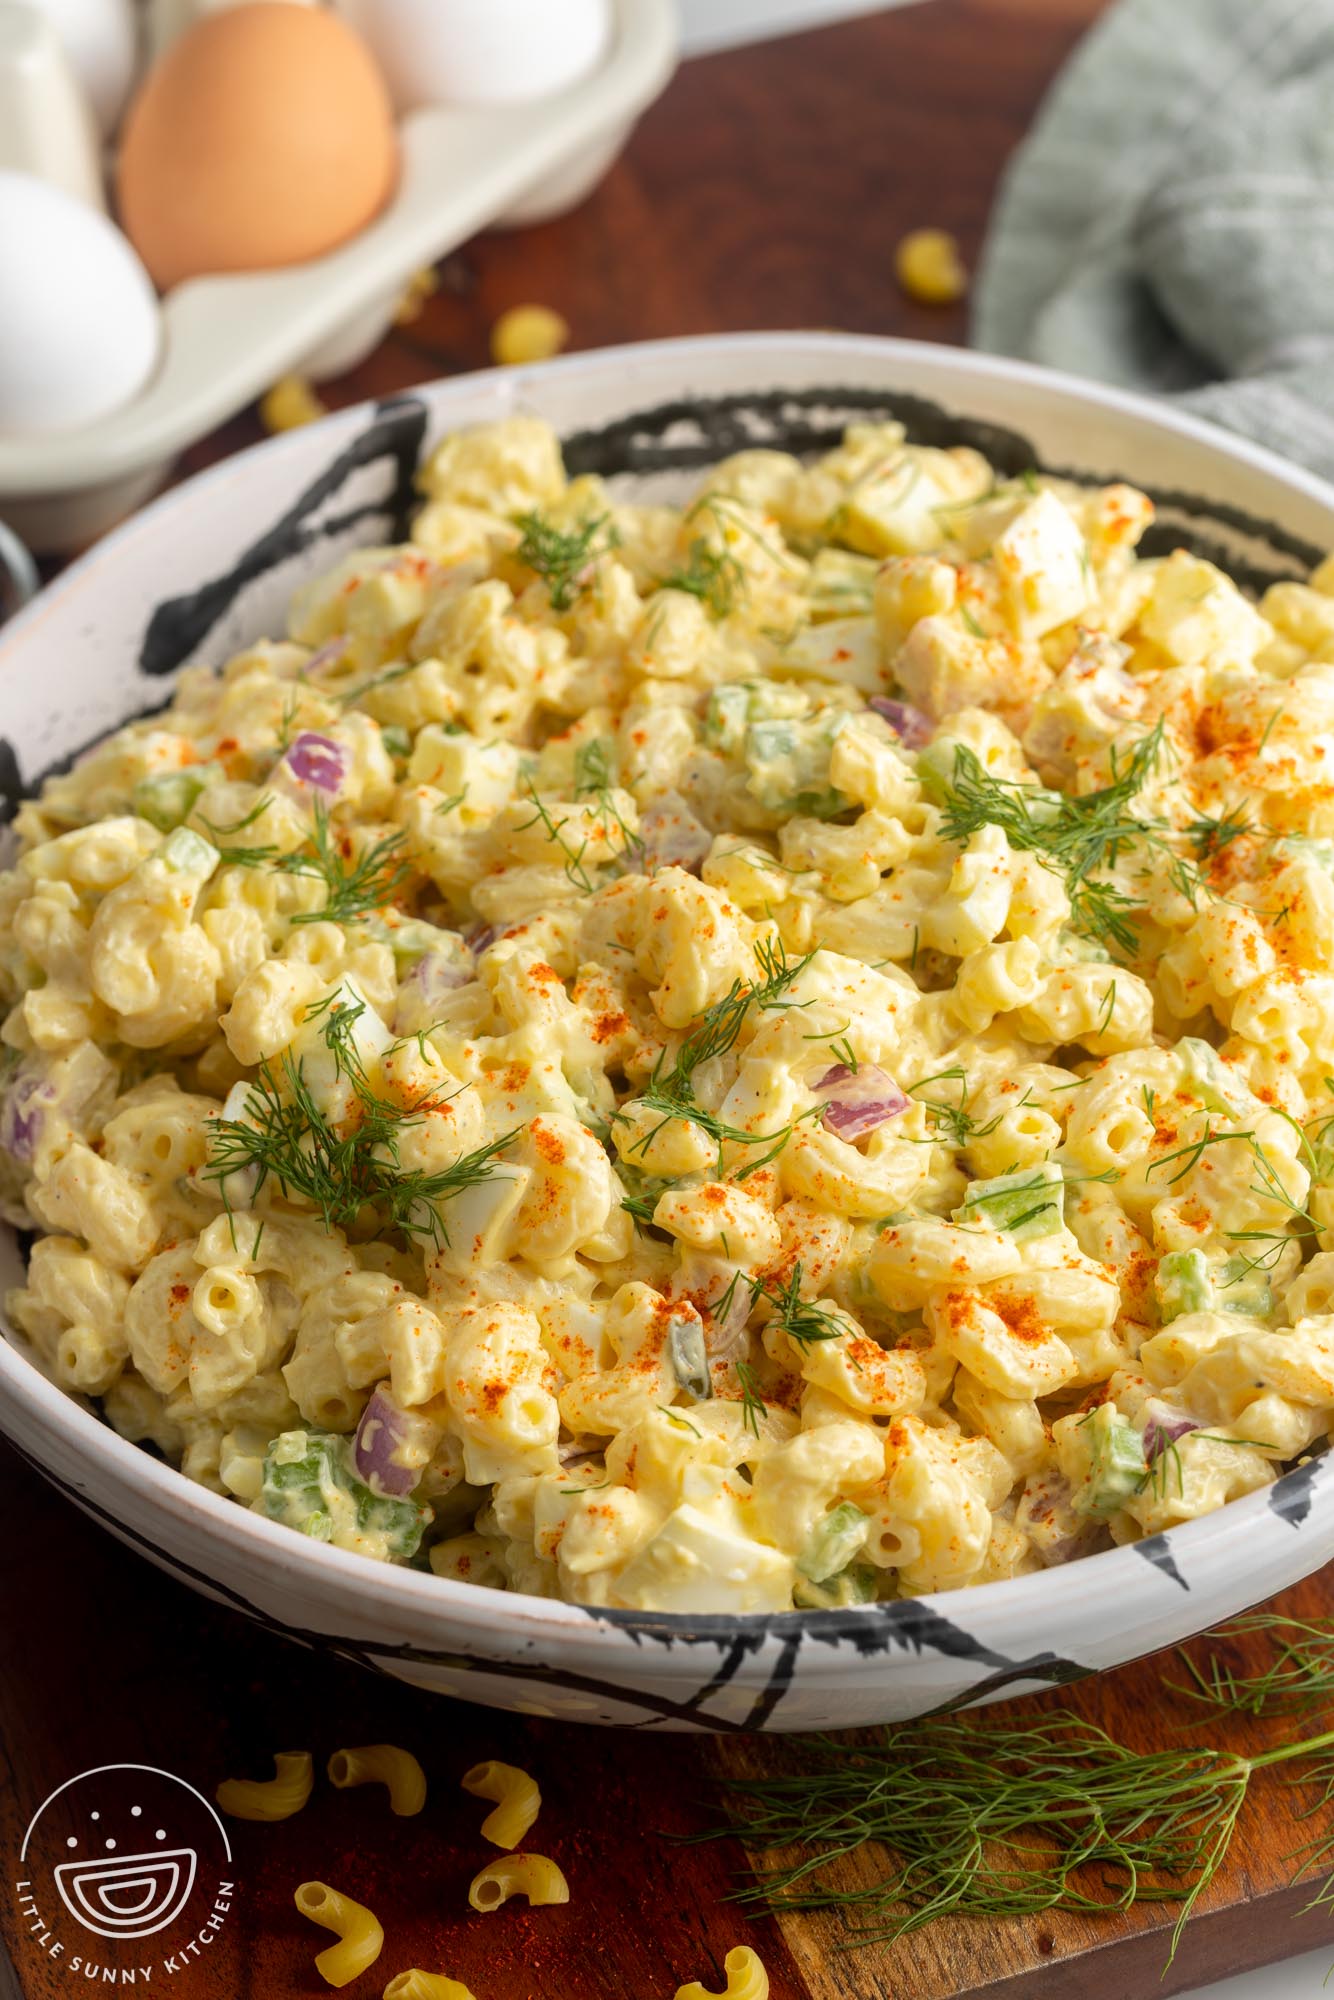 a large bowl of deviled egg pasta salad next to a carton of eggs.